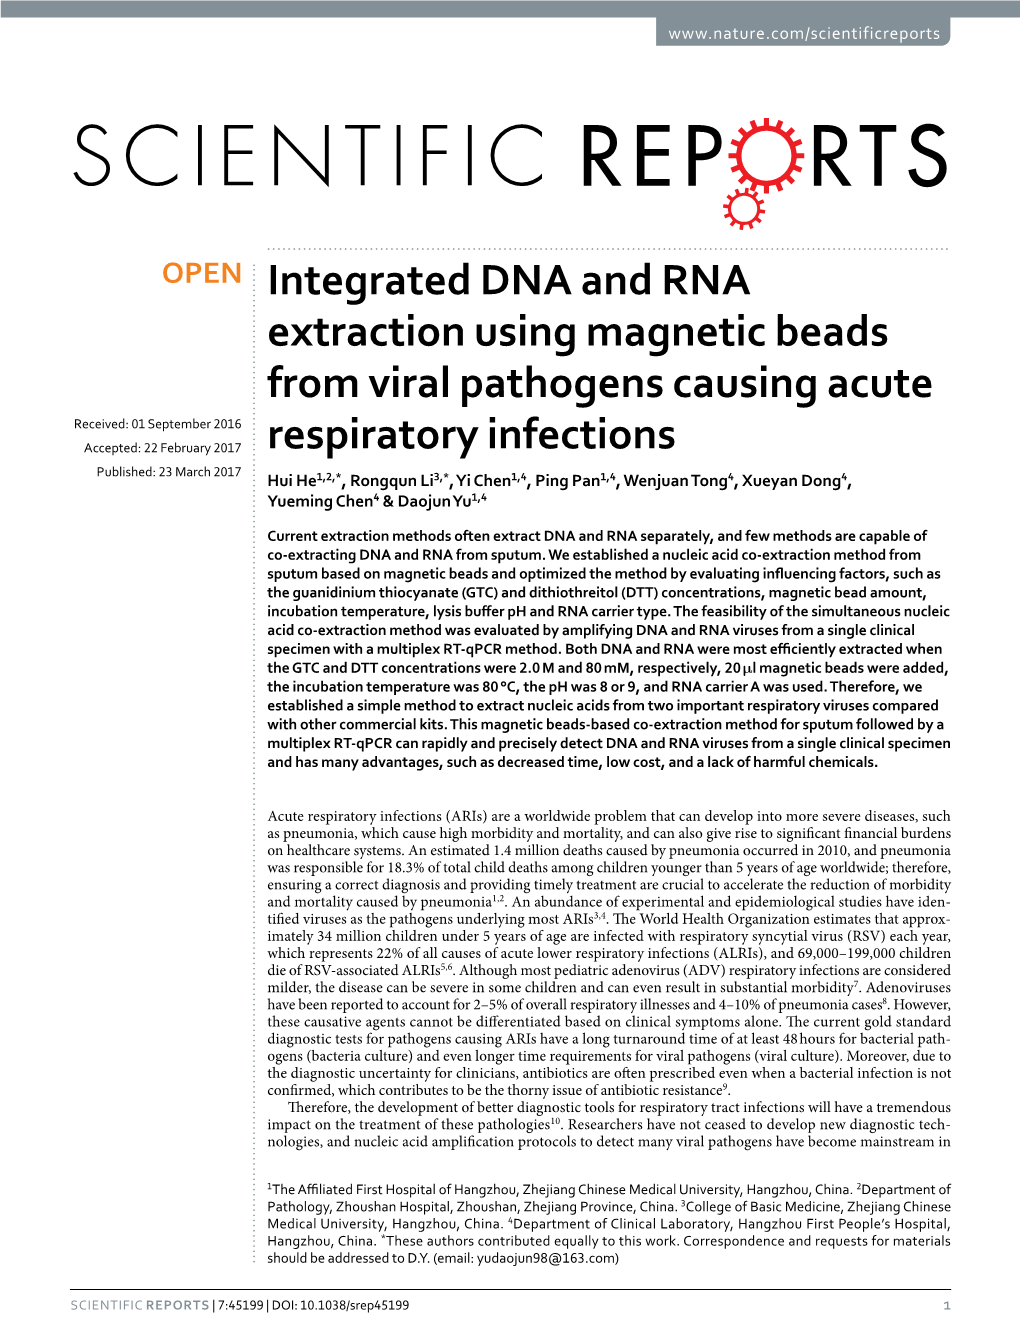 Integrated DNA and RNA Extraction Using Magnetic Beads from Viral